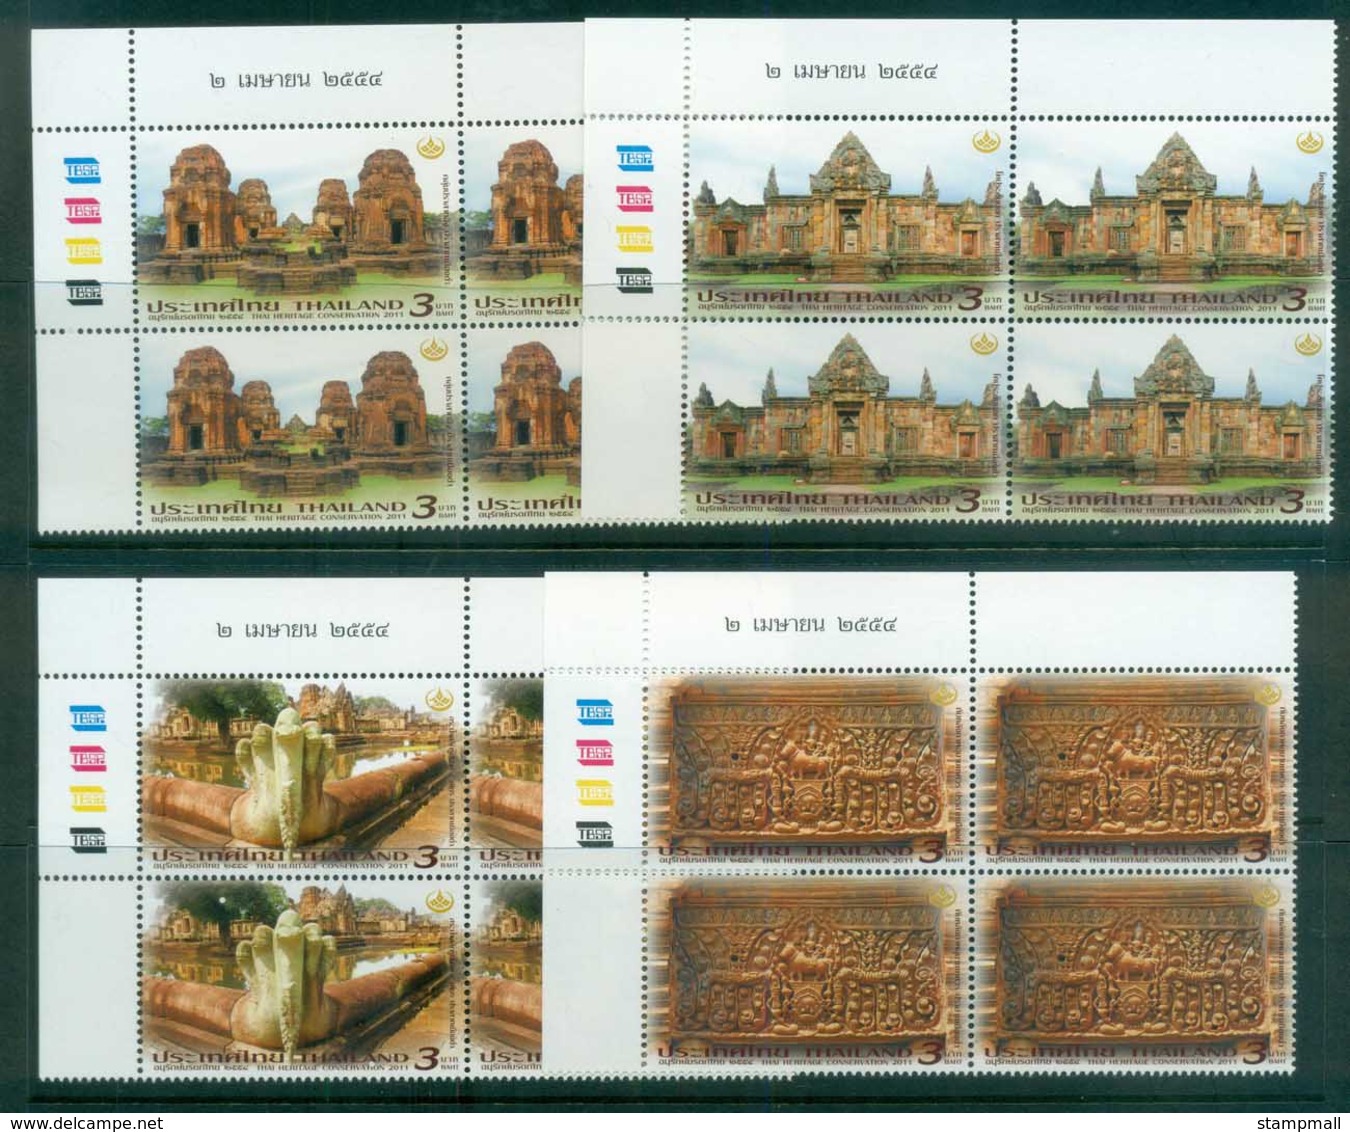 Thailand 2011 Heritage Conservation Temples Blk 4 MUH Lot82087 - Thailand